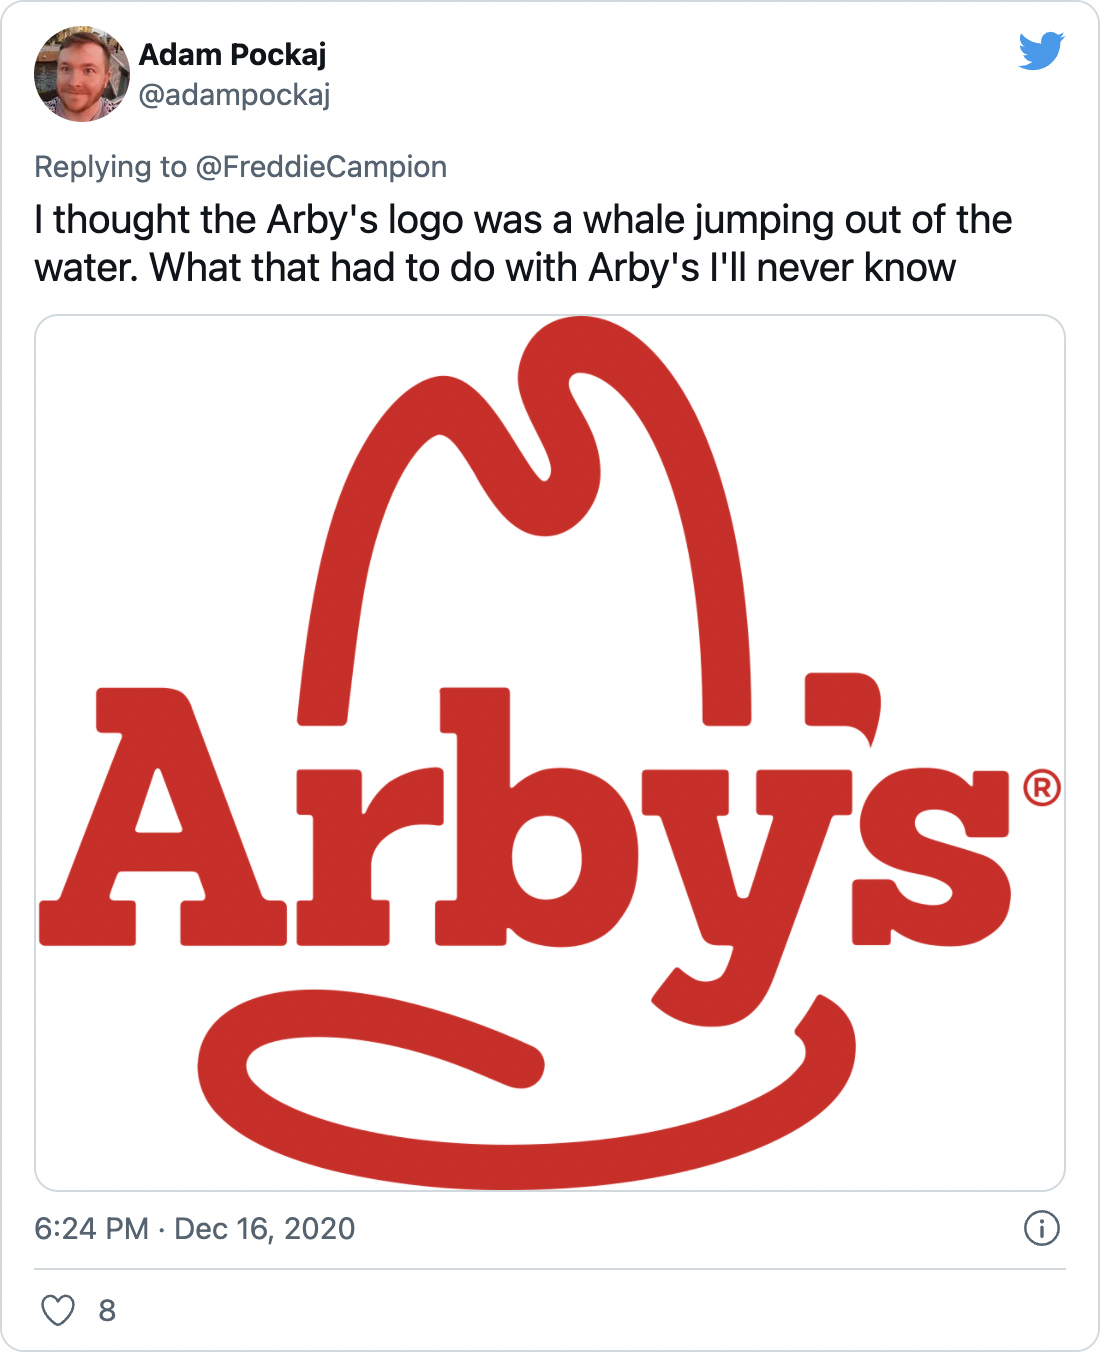 I thought the Arby's logo was a whale jumping out of the water. What that had to do with Arby's I'll never know - @adampockaj